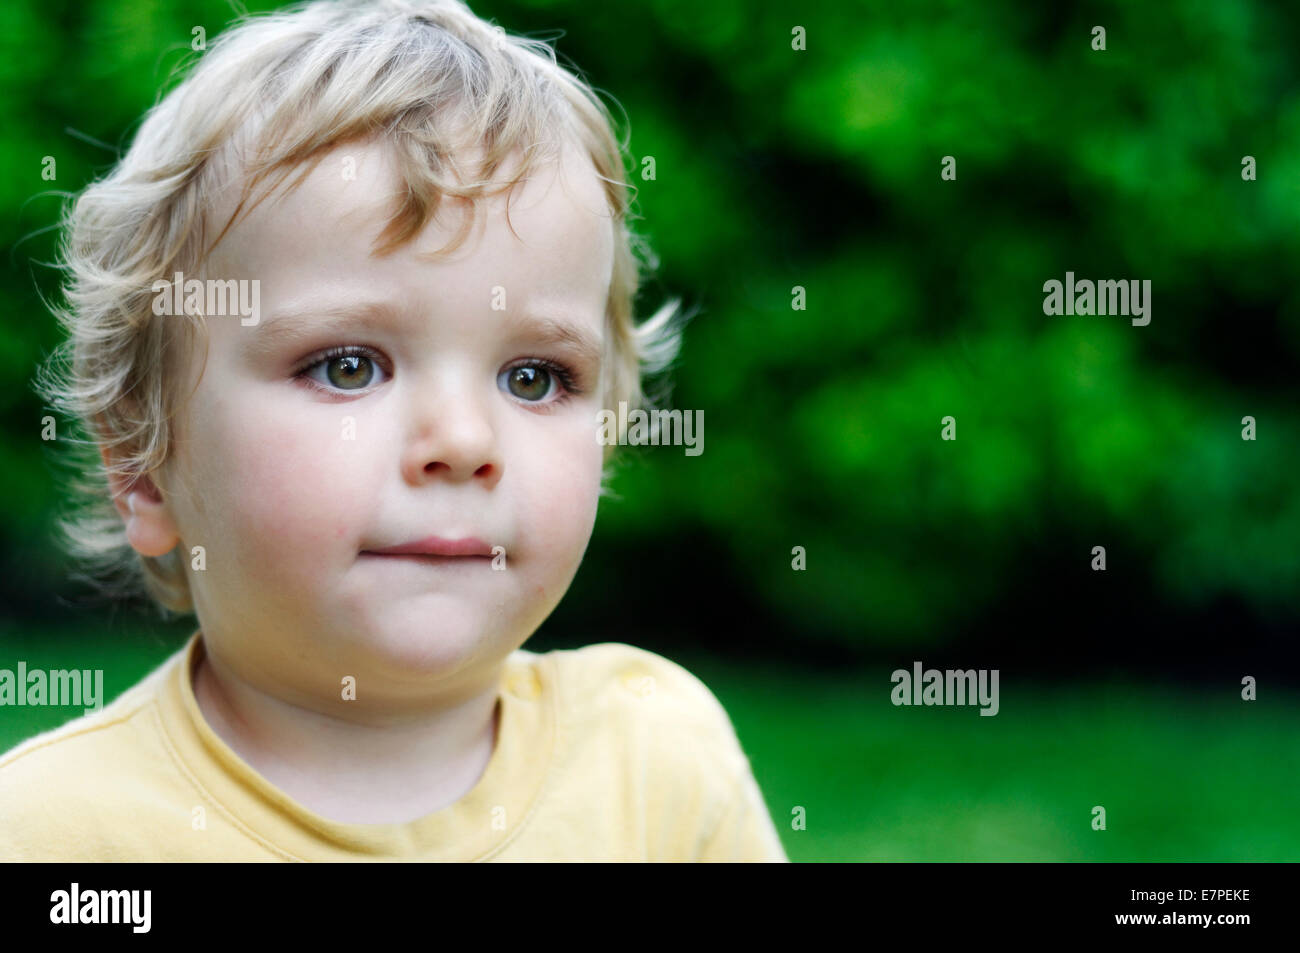 A thoughtful young boy (2 1/2 yrs old) Stock Photo